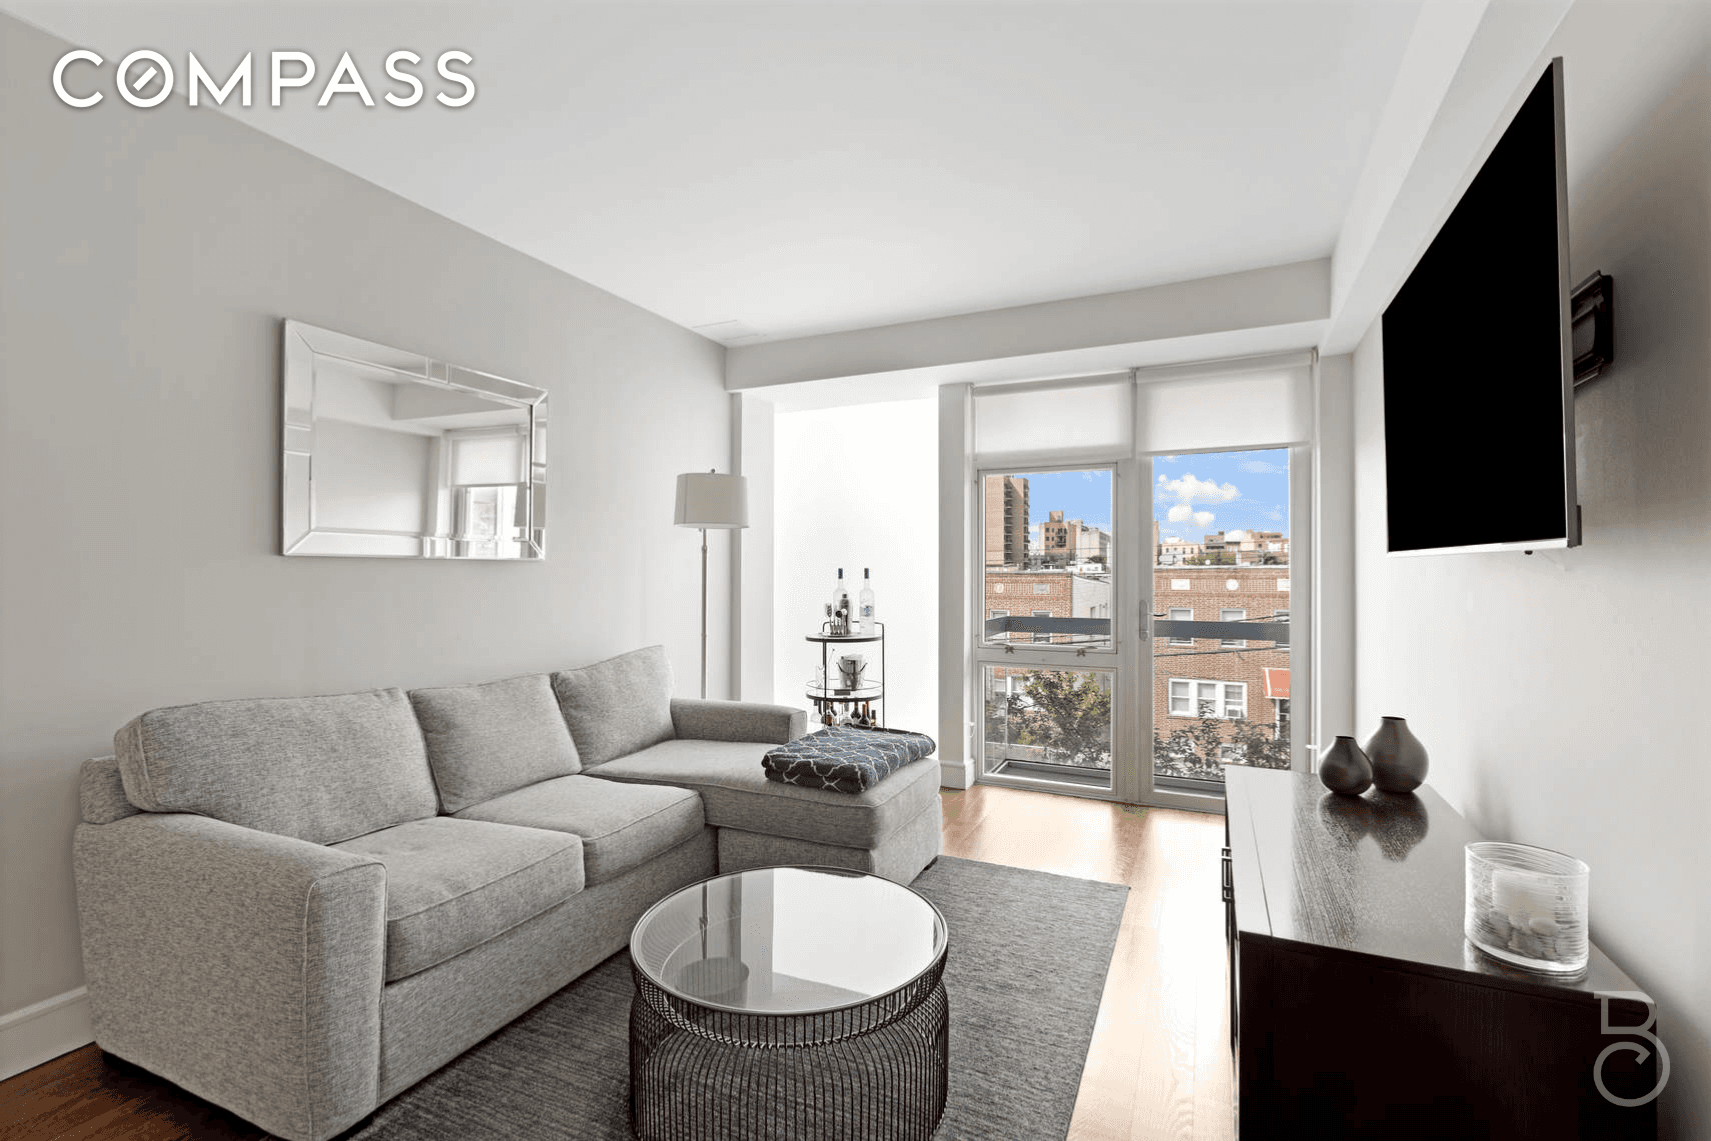 Welcome home ! This luxury condo, with 421A abatement, is located on 30 Ave, near all that Astoria has to offer.